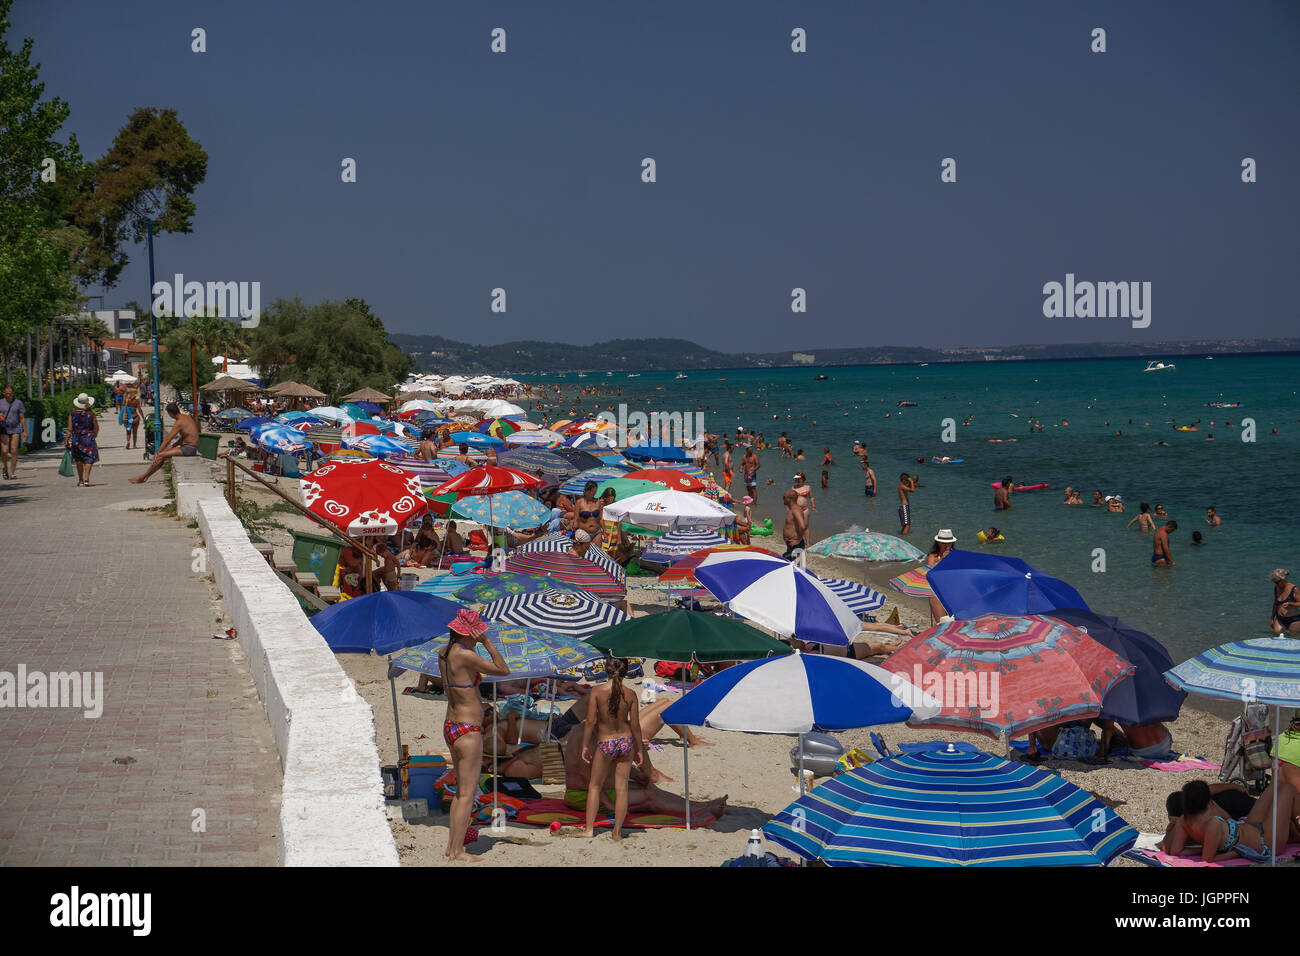 Bathers on the beach on a hot summer day at Greece. Sunbathers on a beach with beach umbrellas at Chaniotis, Chalkidiki peninsula. Stock Photo